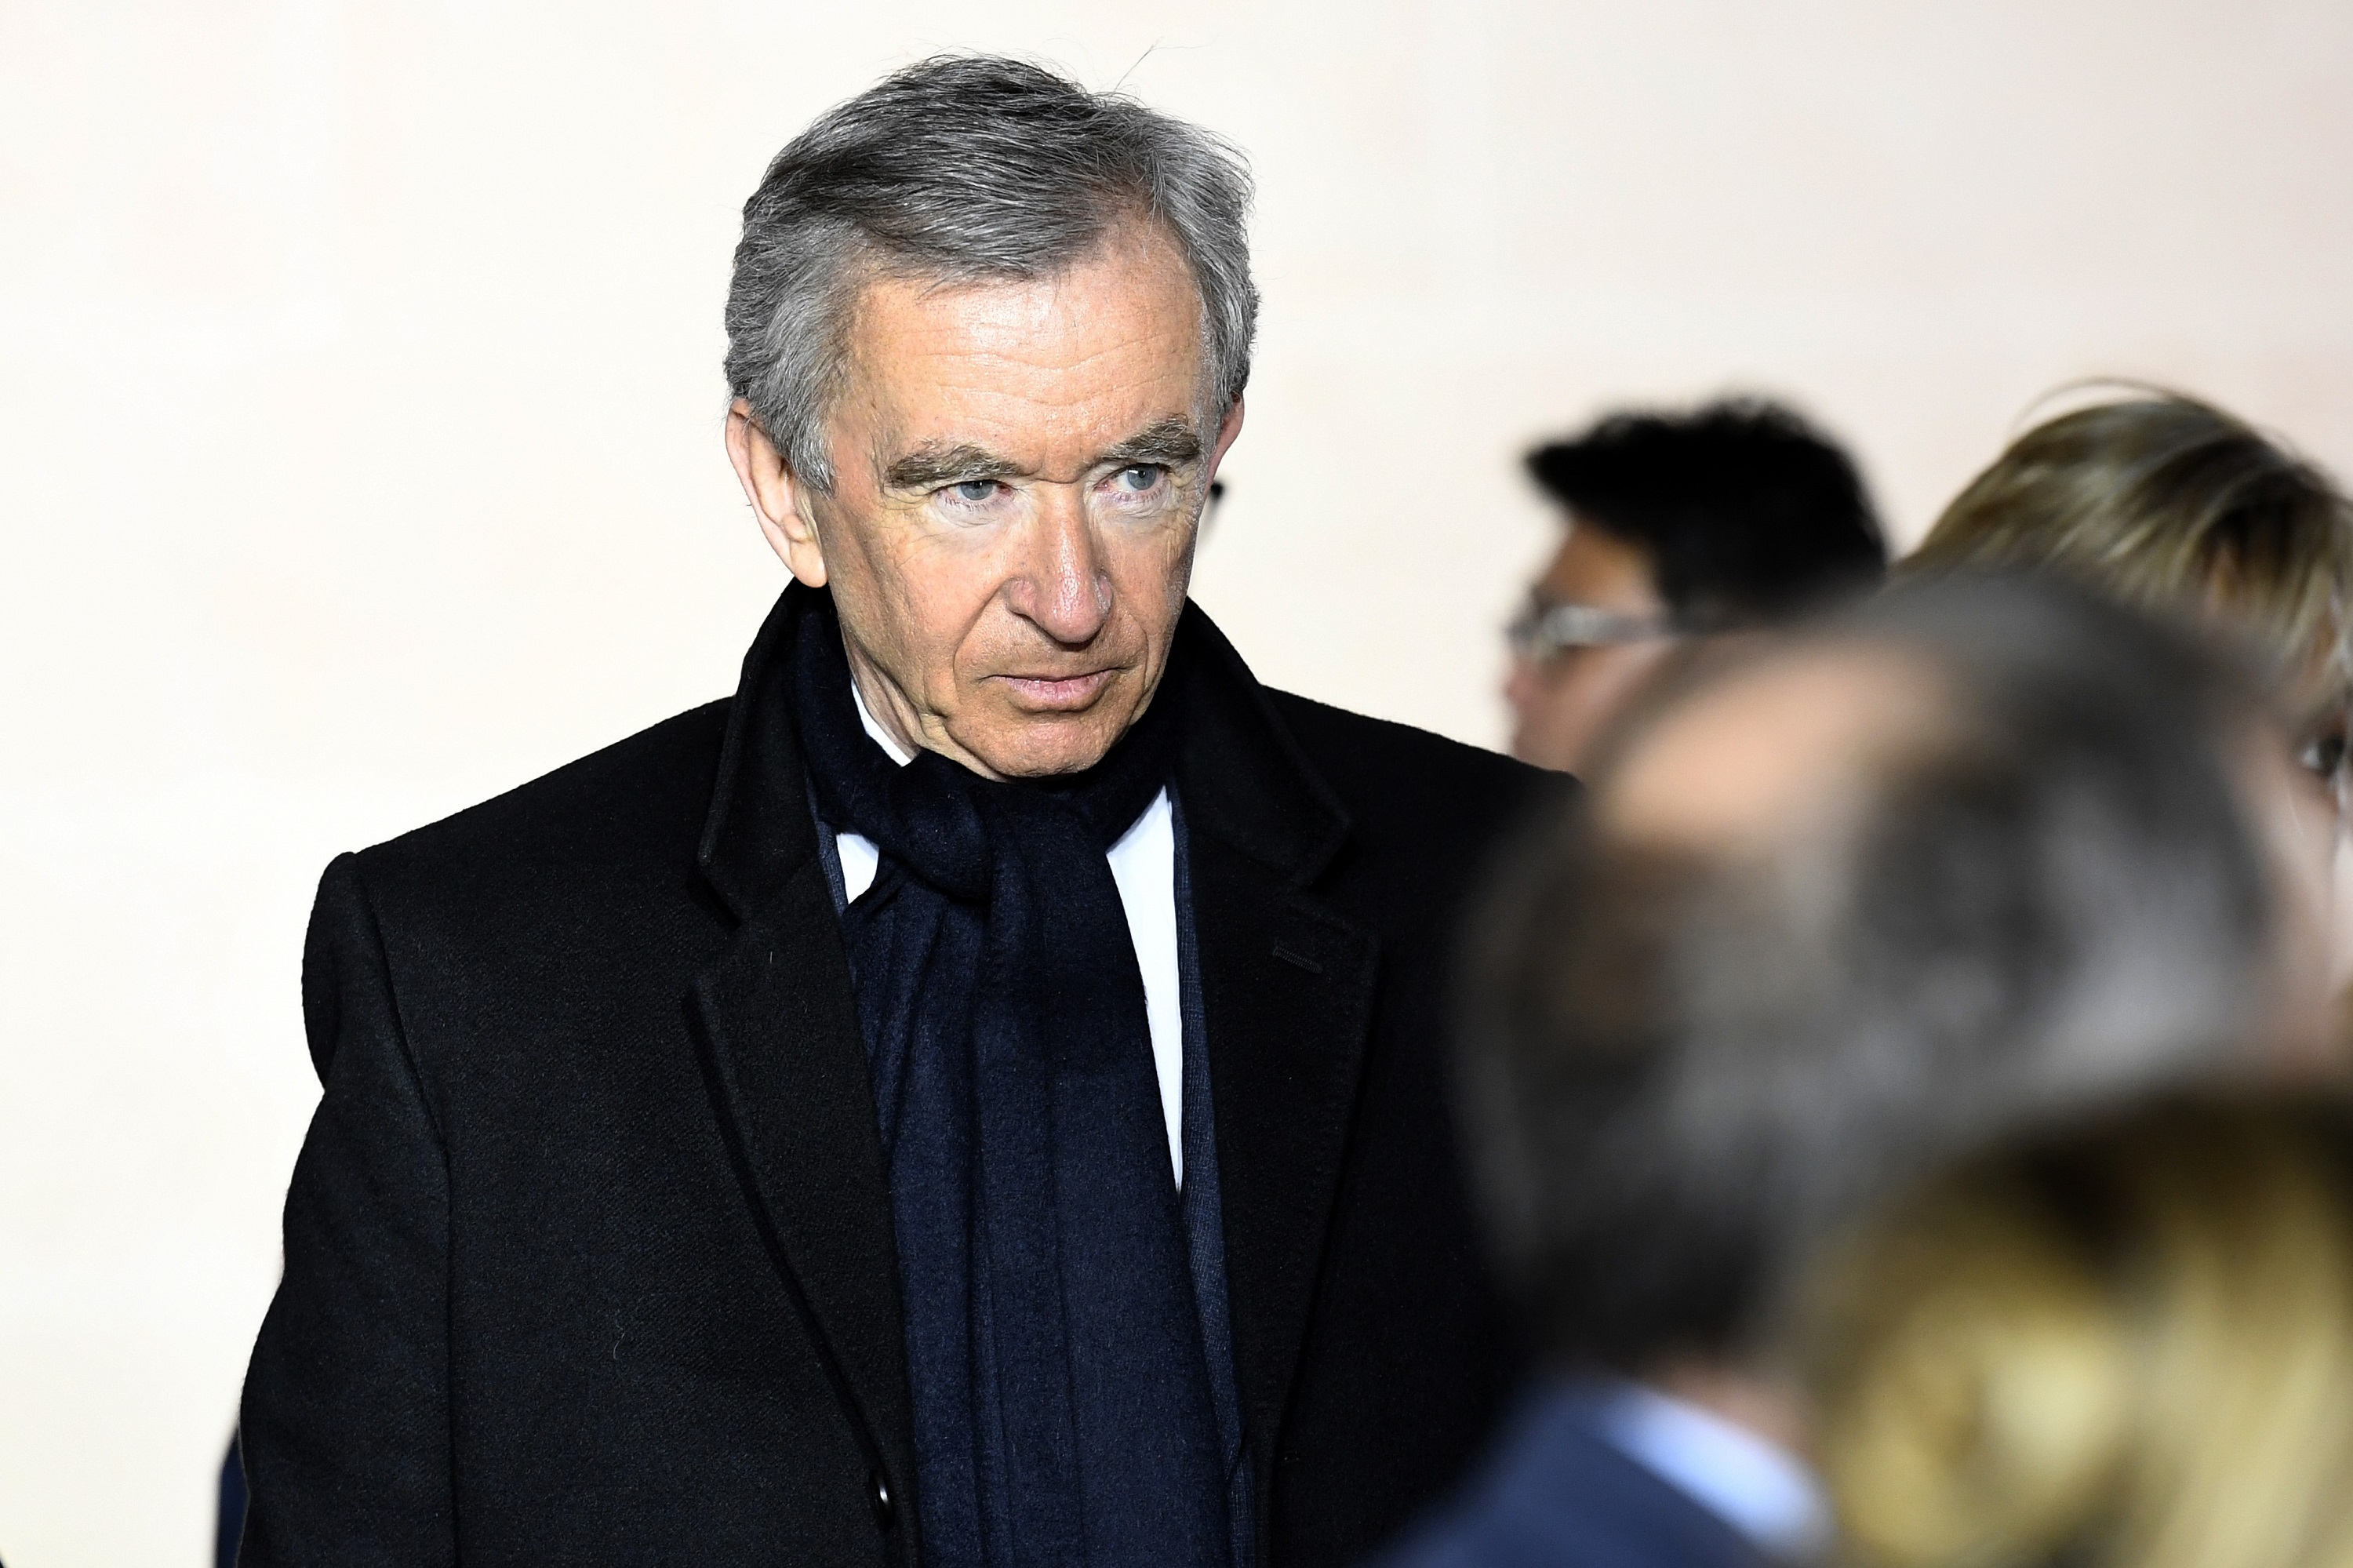 LVMH's Bernard Arnault Is the King of Luxury, but Who Is Next to